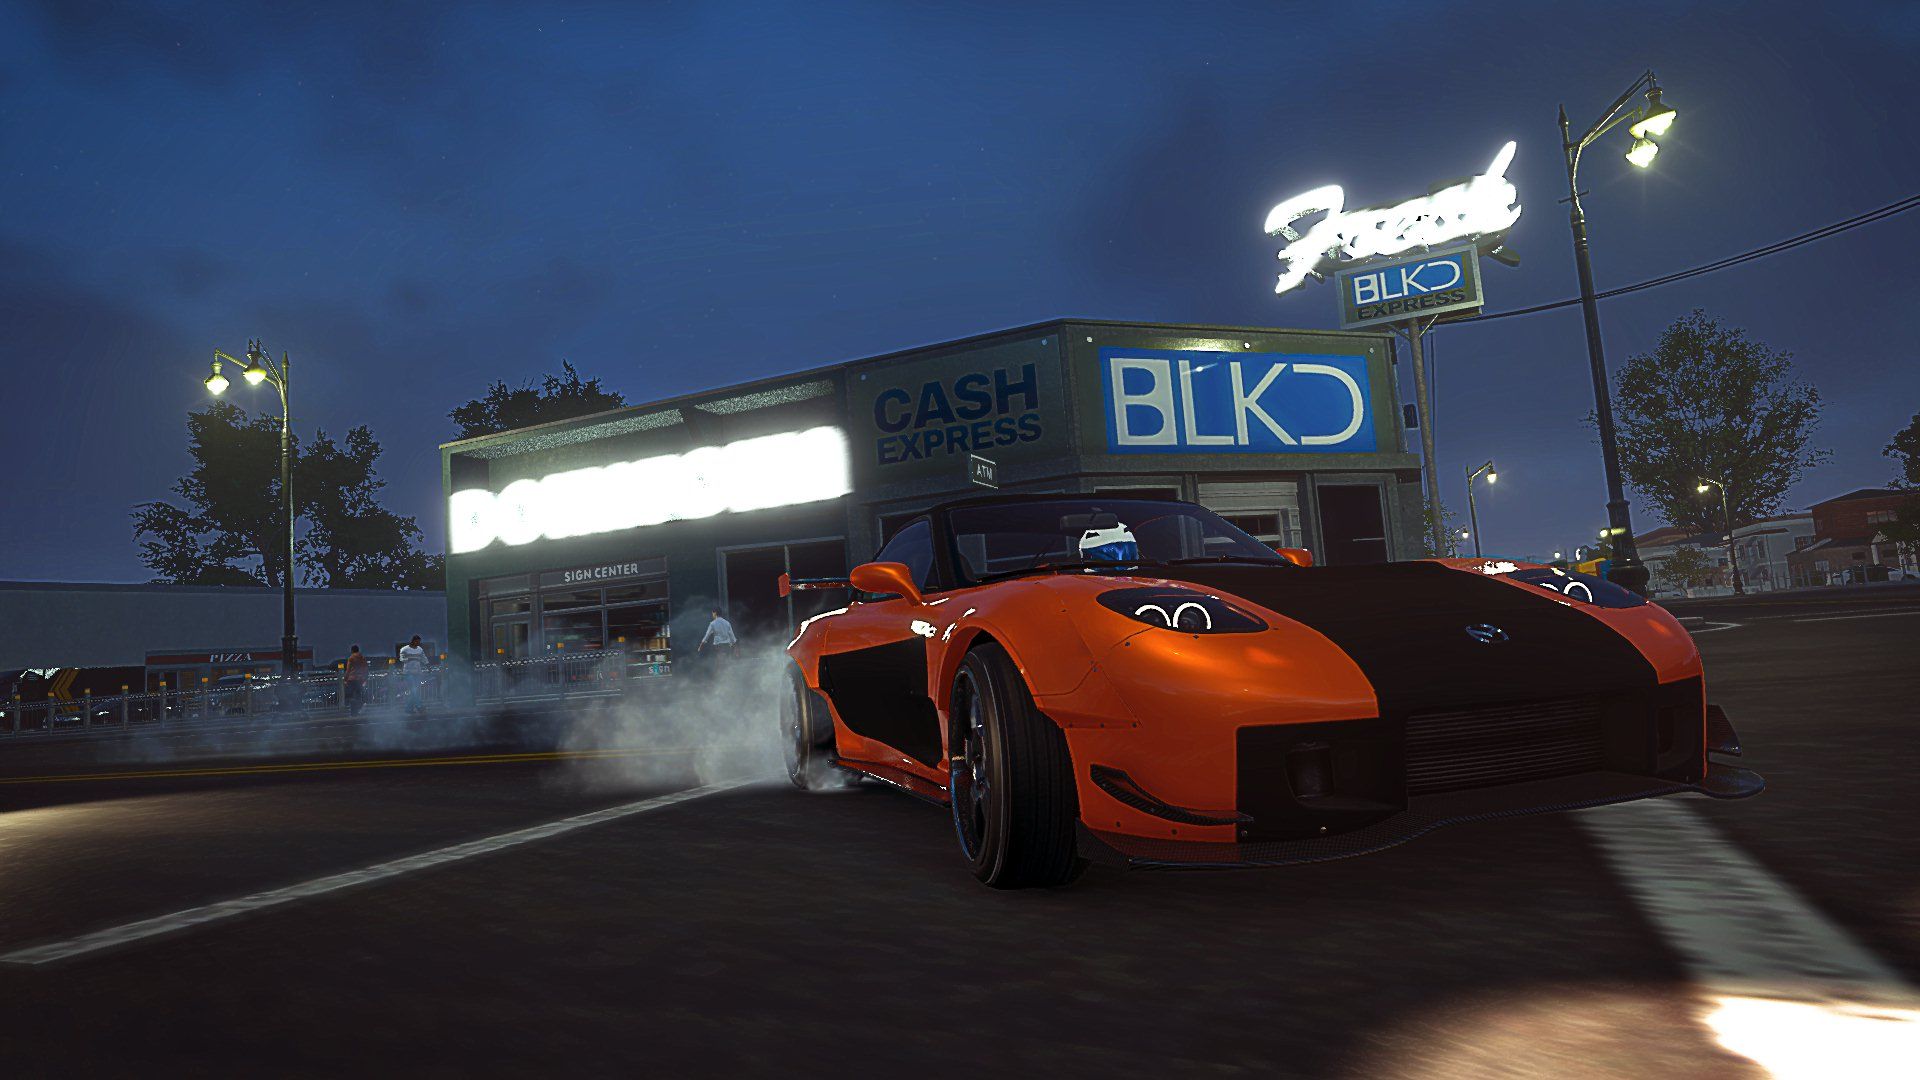 The Crew 2 Han's RX7 from Fast & Furious: Tokyo Drift